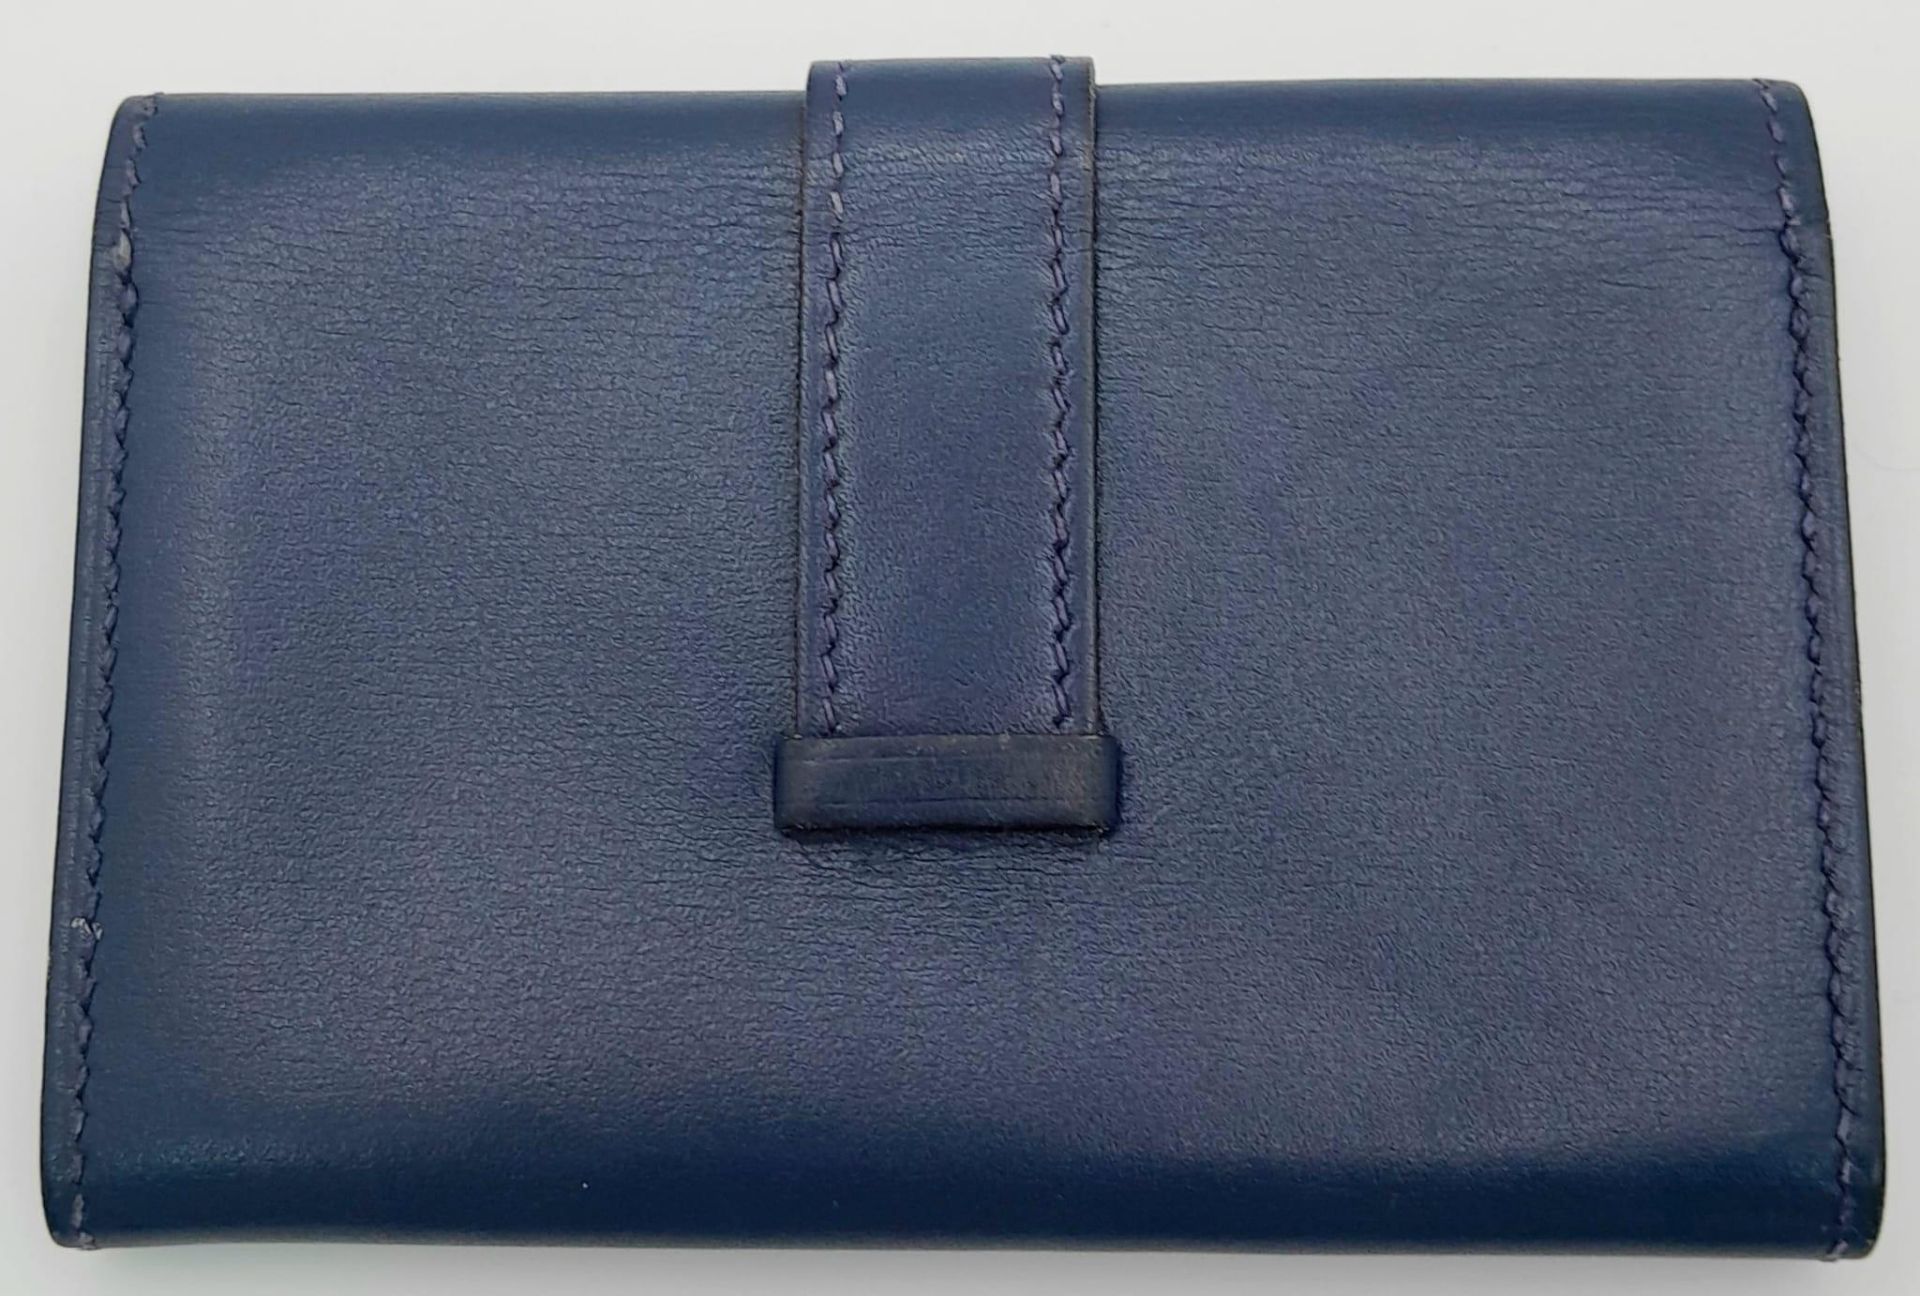 A Small Blue Leather Hermes Ladies Wallet. Flap design with Letter H branding. In good condition but - Image 2 of 7